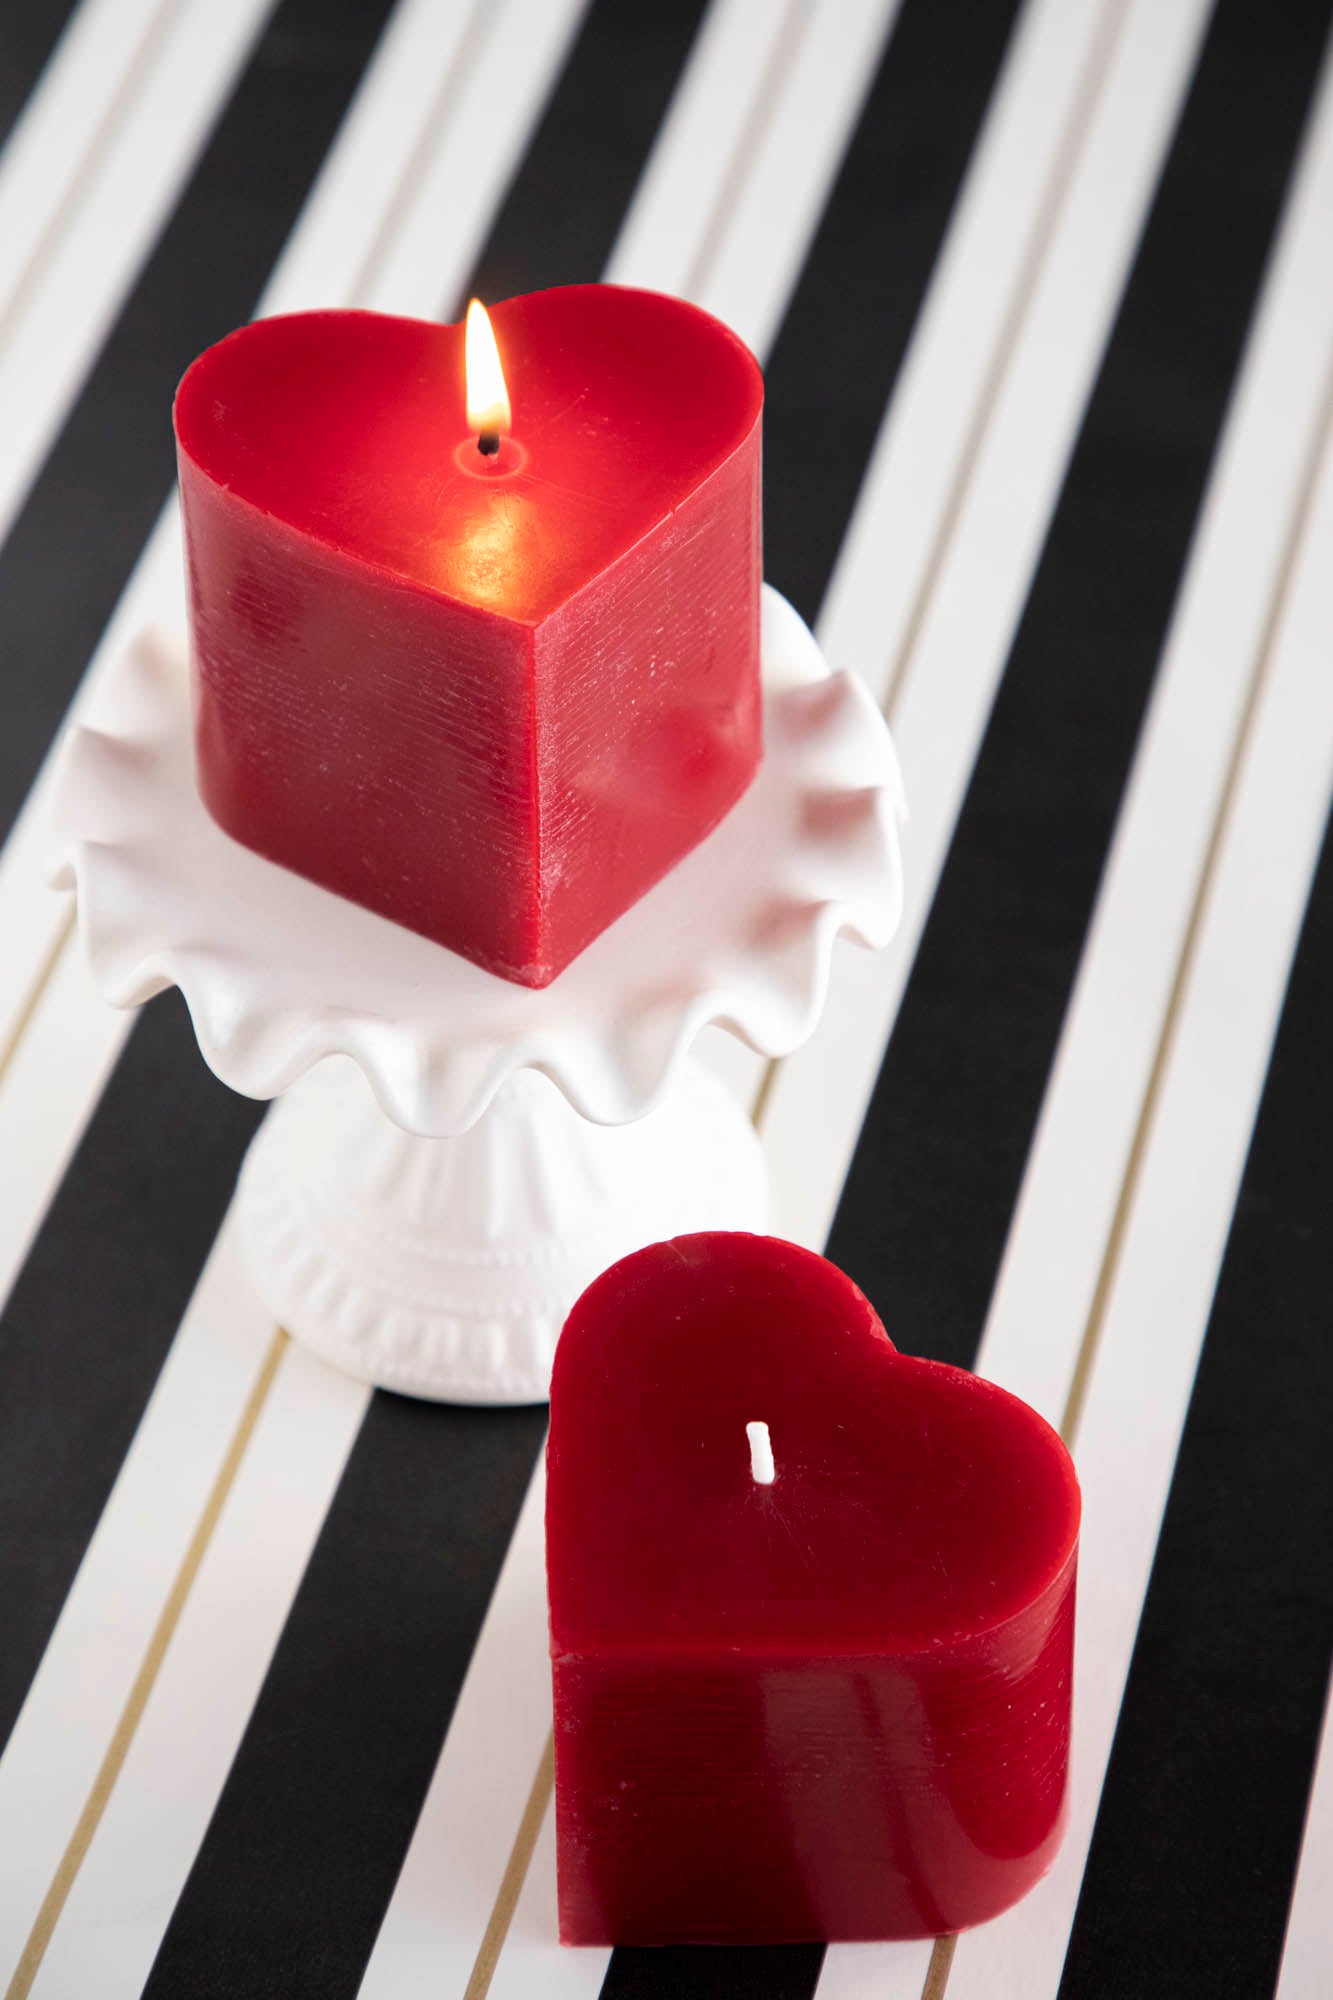 100% pure beeswax heart shaped candle-large 4 heart candle